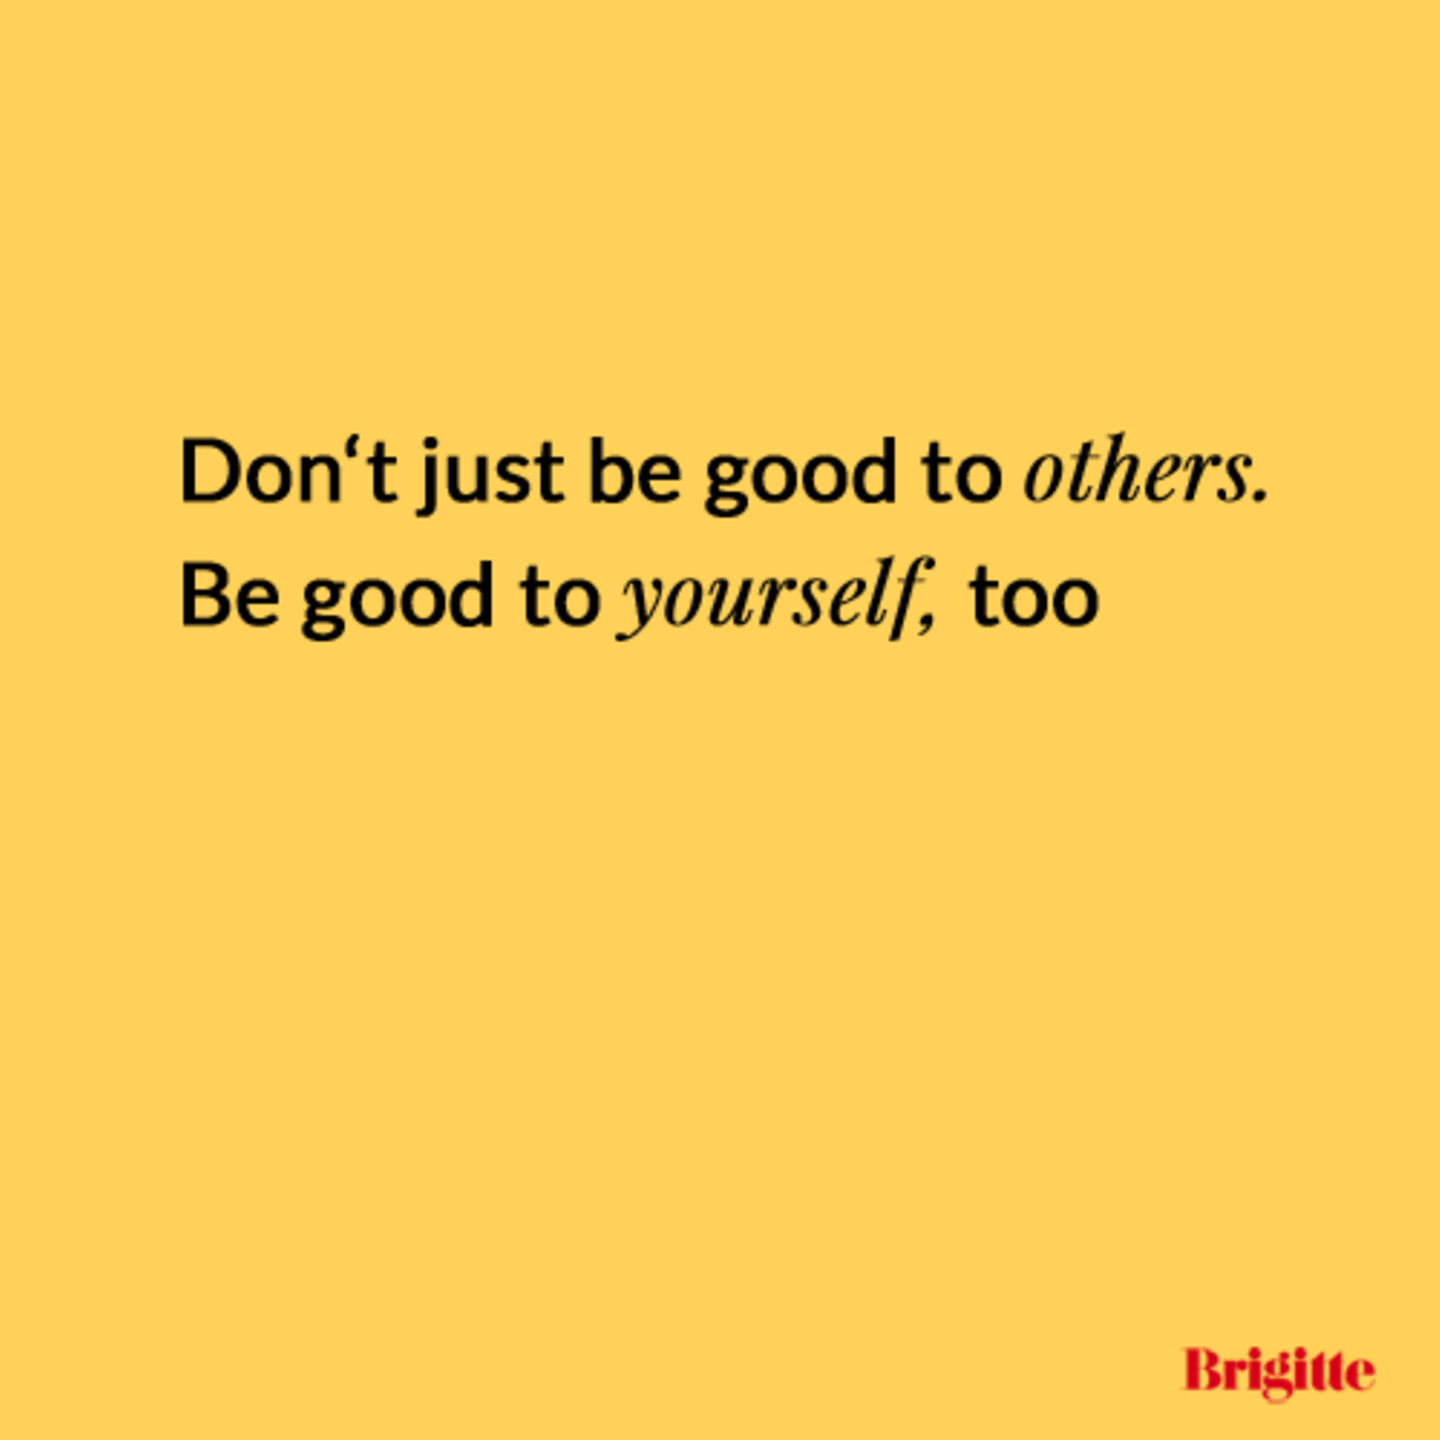 Don't just be good to others. Be good to yourself, too